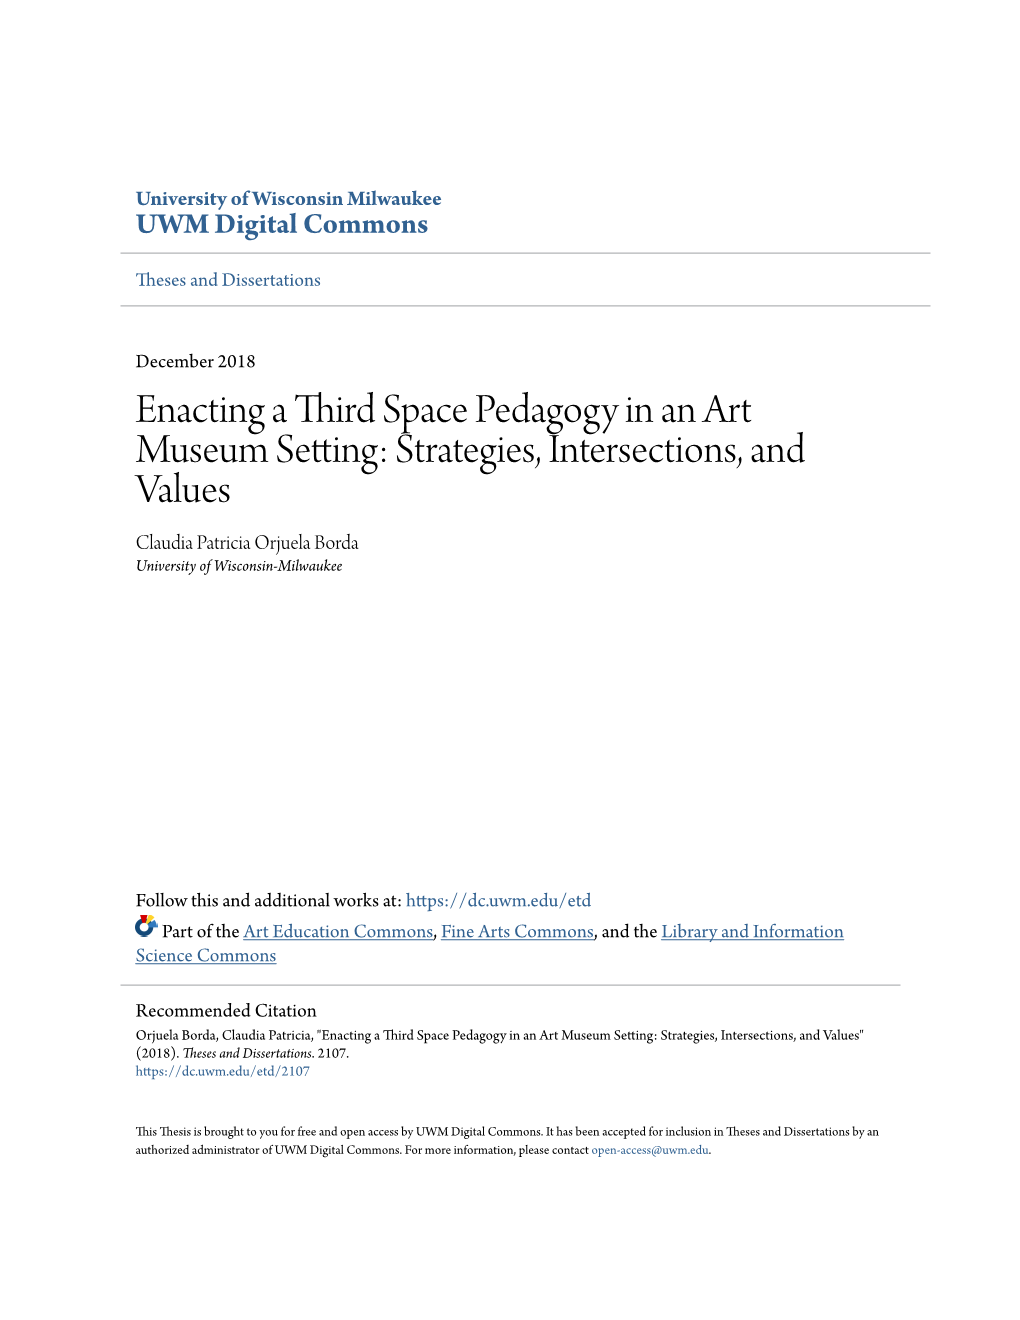 Enacting a Third Space Pedagogy in an Art Museum Setting: Strategies, Intersections, and Values Claudia Patricia Orjuela Borda University of Wisconsin-Milwaukee